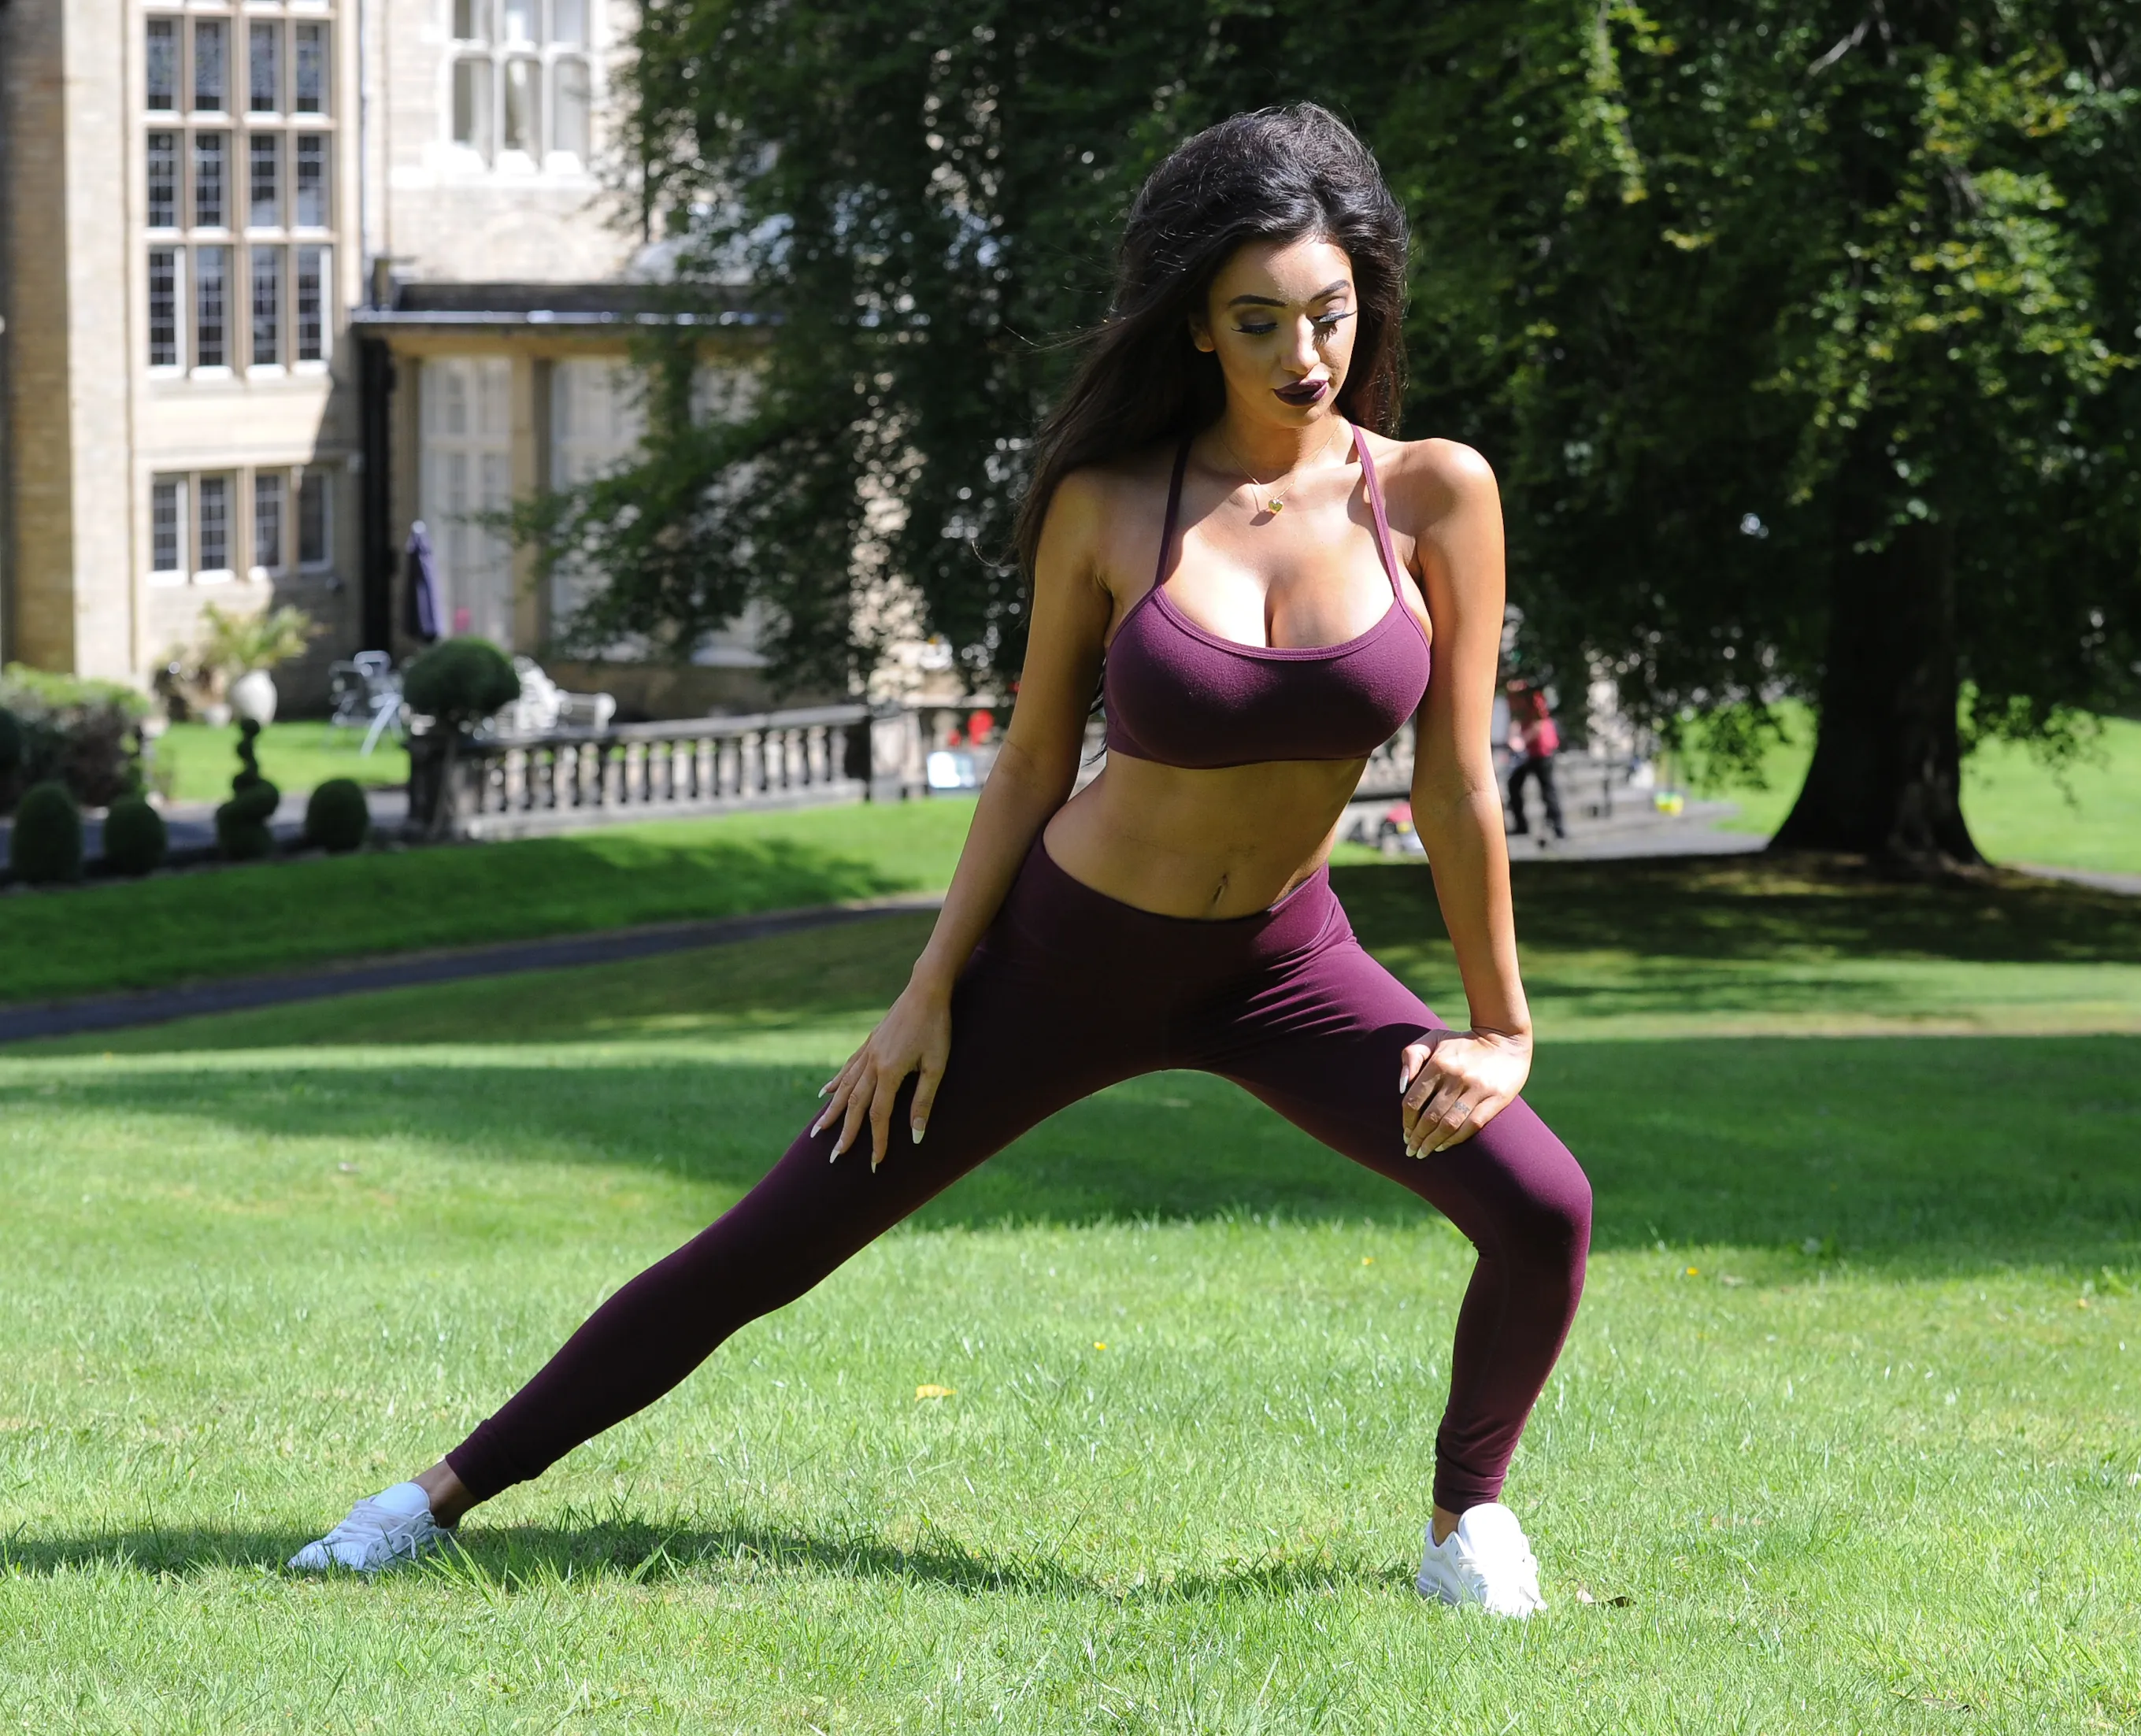 X Factor and Celebrity Big Brother starlet Chloe Khan is seen working up a ...